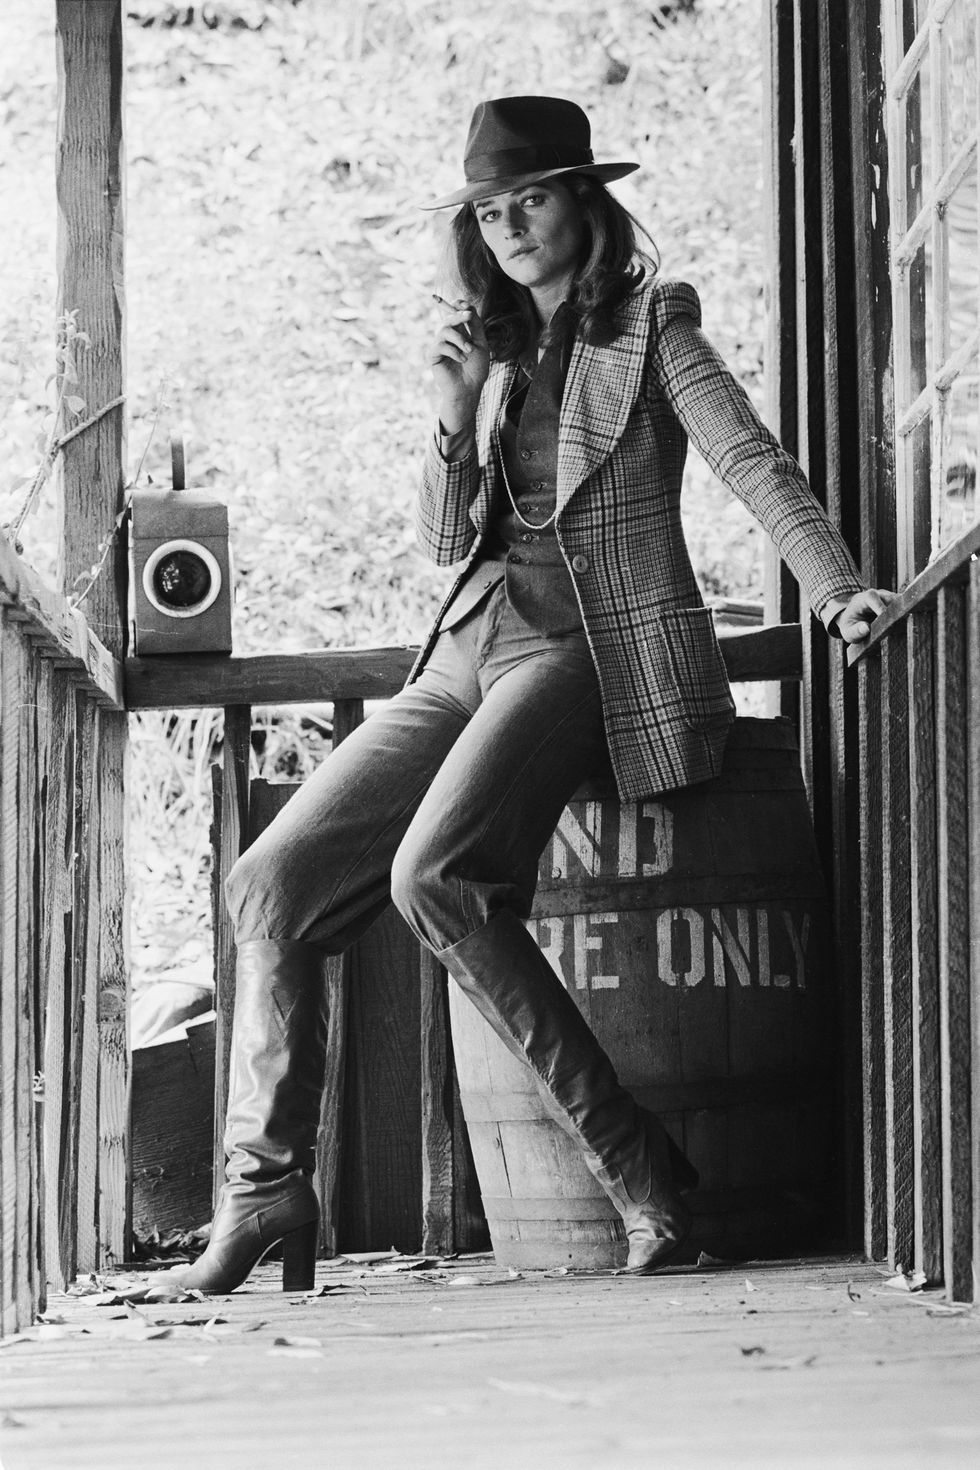 English actress Charlotte Rampling wearing a tweed jacket and trilby, February 1976. (Photo by Terry O'Neill/Hulton Archive/Getty Images)